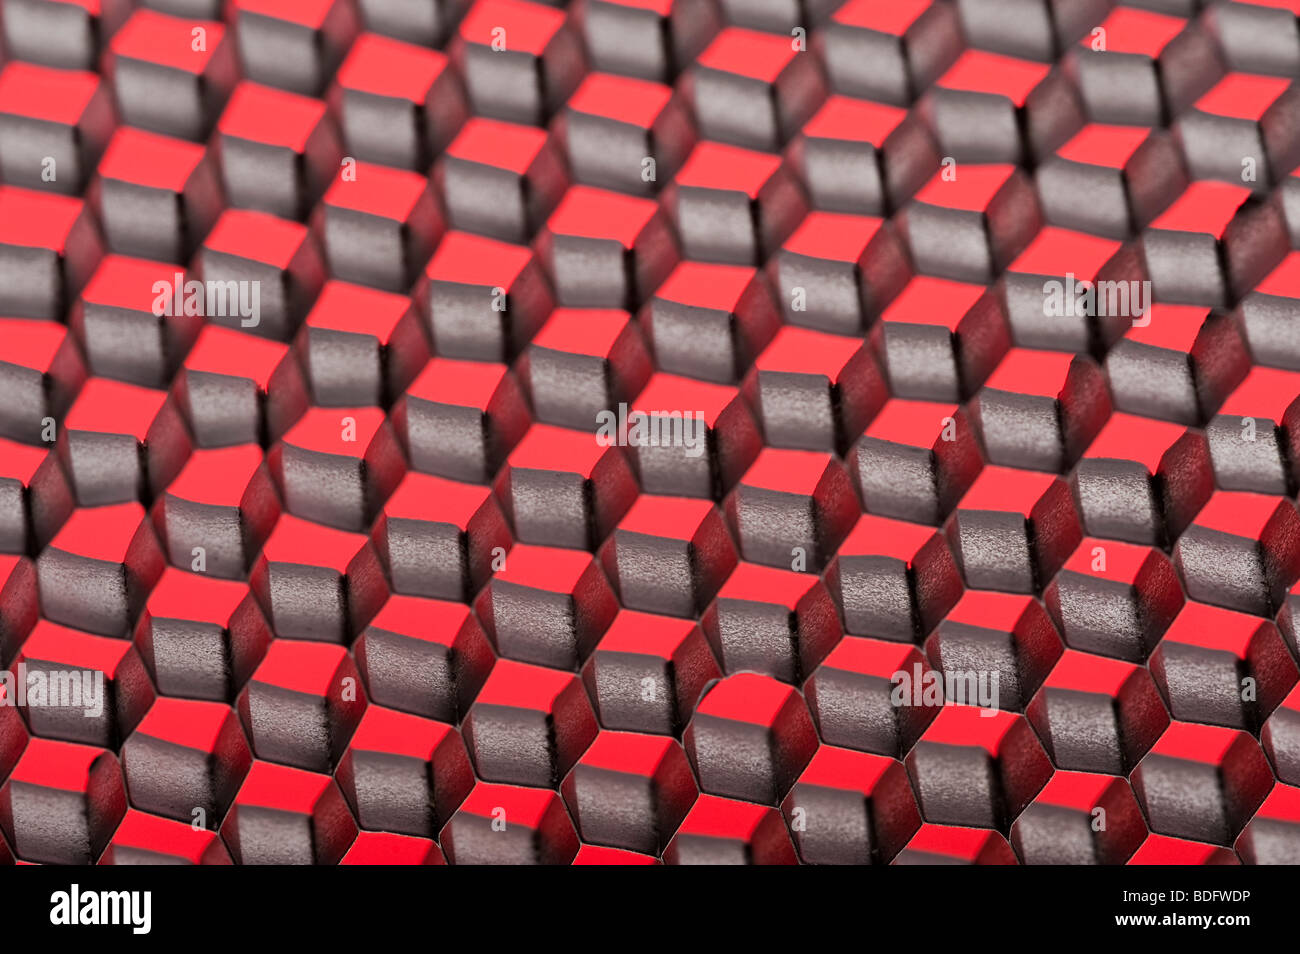 Red gray and black checkerboard pattern Stock Photo